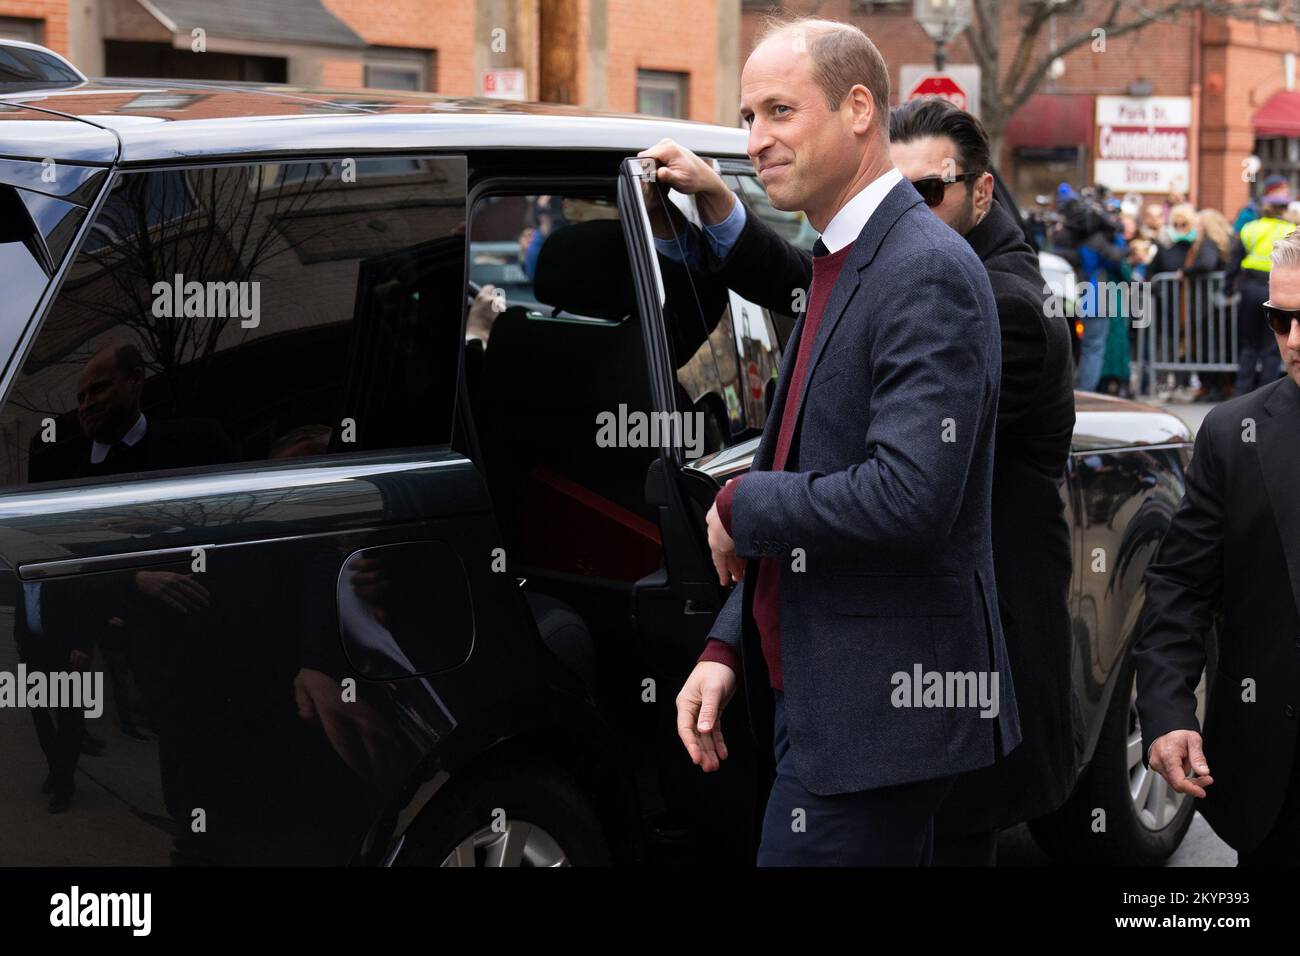 Chelsea, MA, USA. 1st Dec, 2022. Prince William and Princess Kate visit Roca during their visit to Boston in Chelsea, Massachusetts on December 1, 2022. Credit: Katy Rogers/Media Punch/Alamy Live News Stock Photo